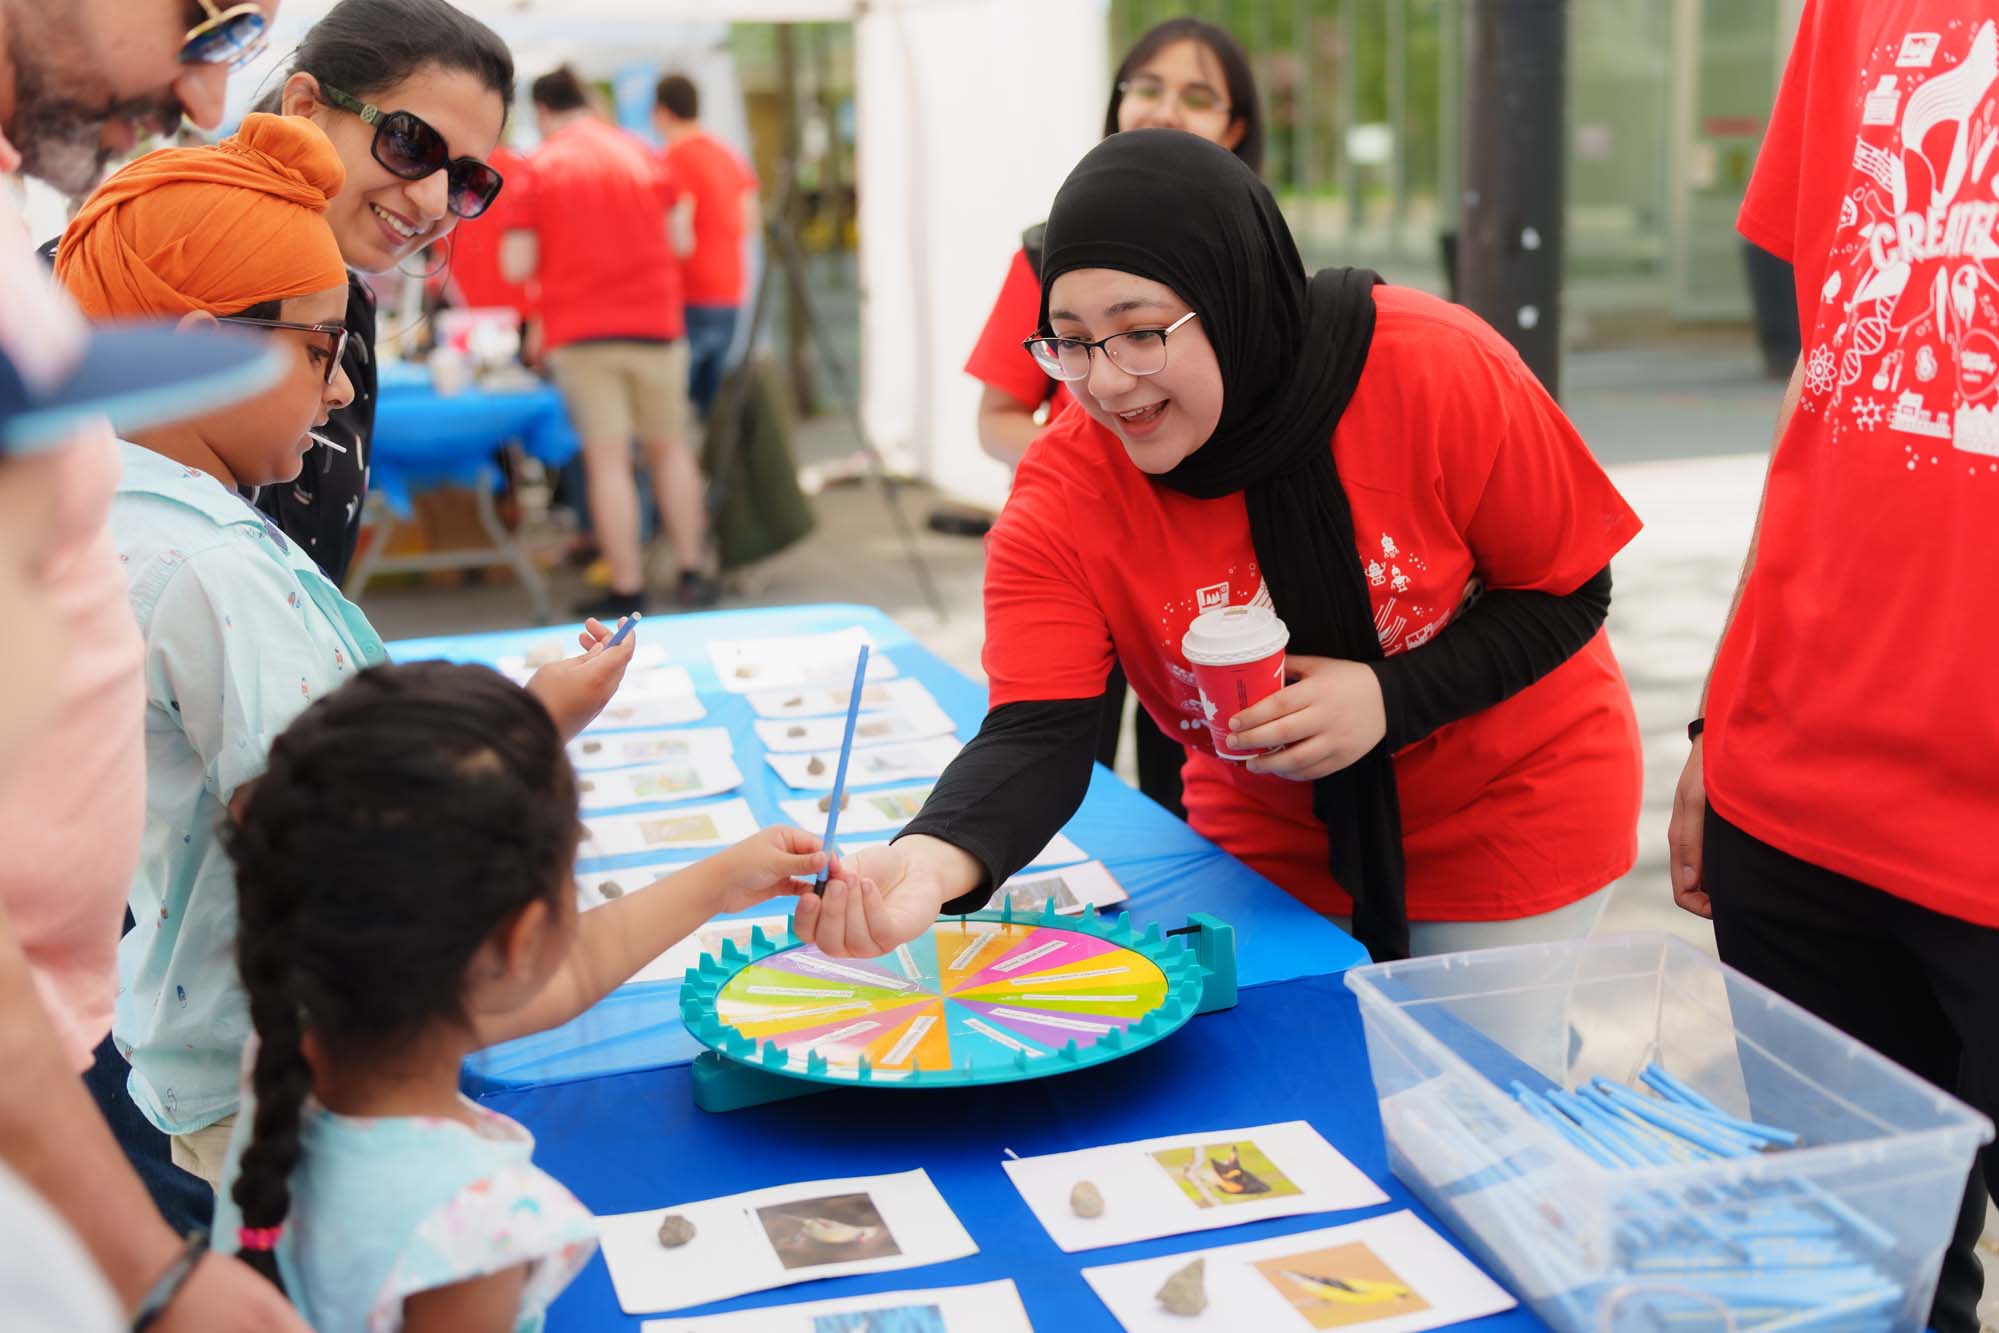 A volunteer giving a blue pencil to a child after playing the bird identification activity at the booth.